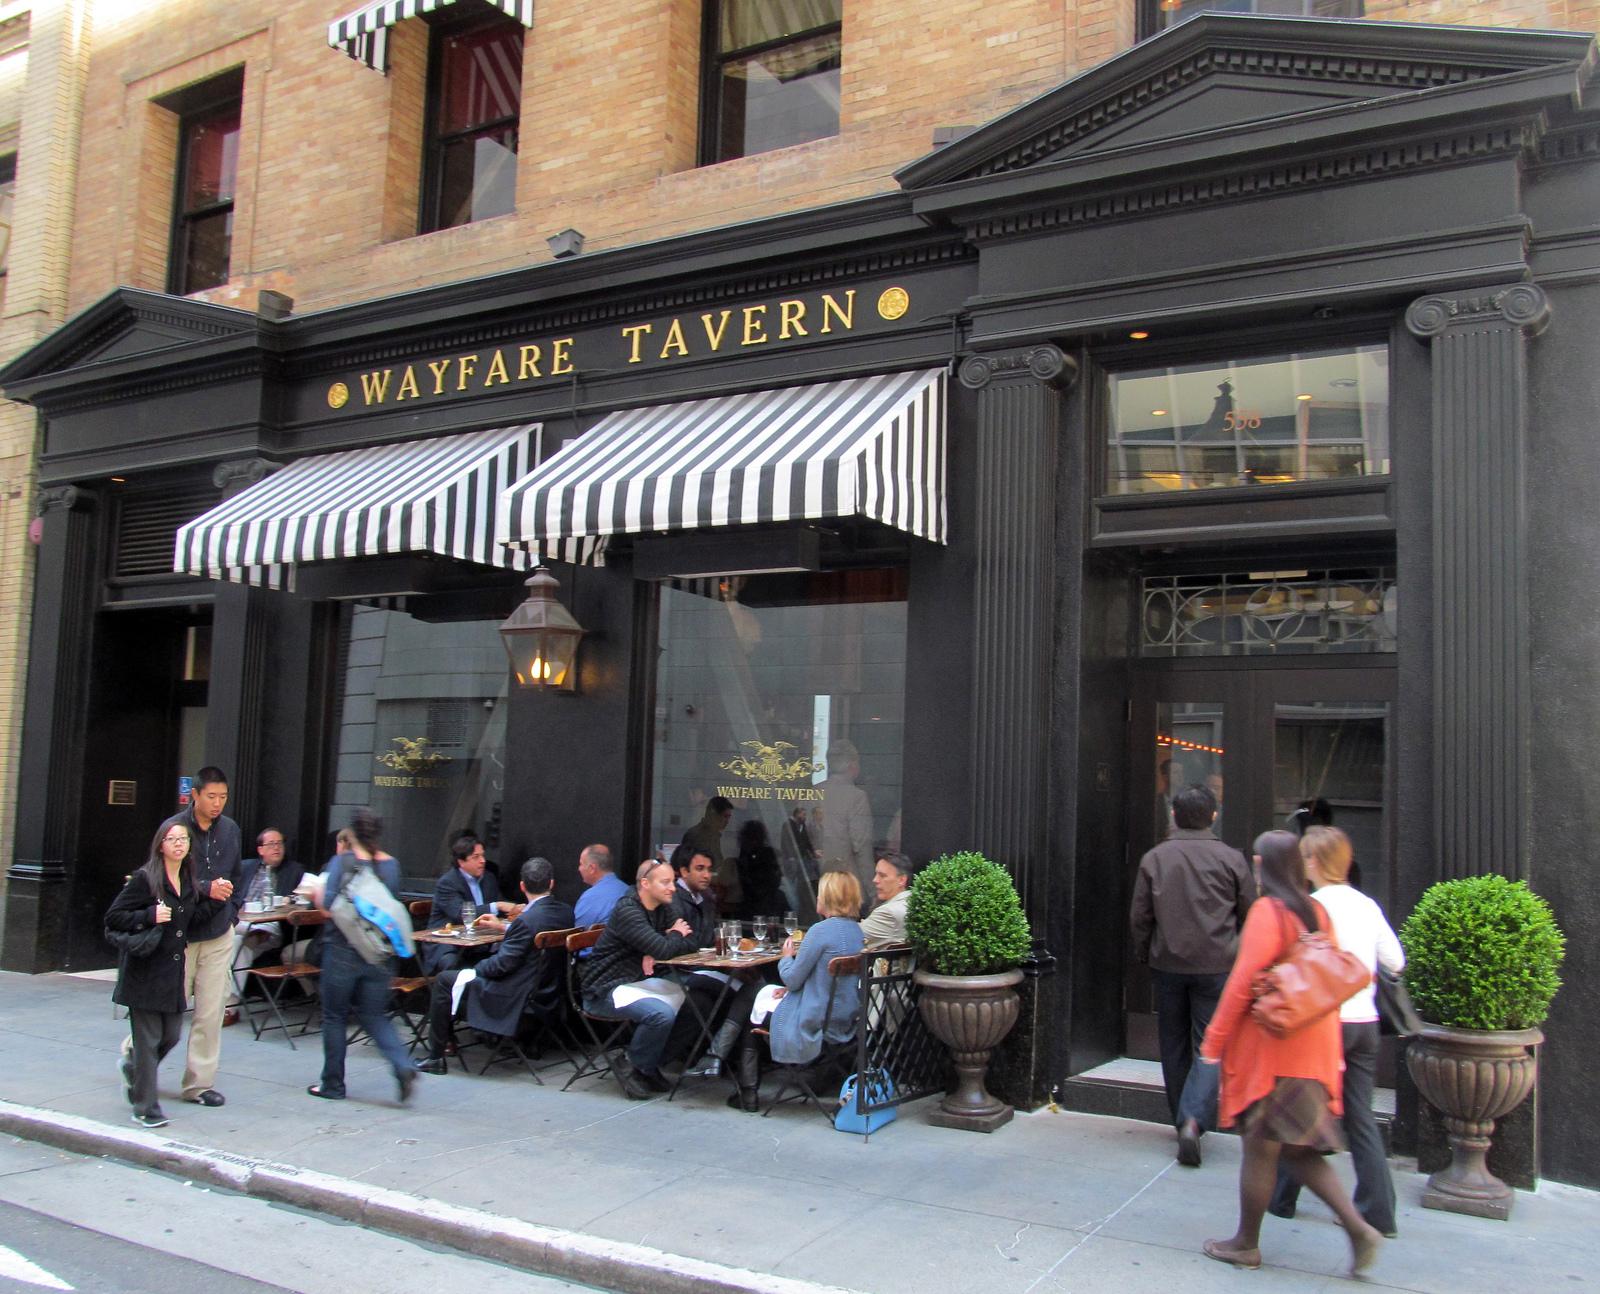 Cover image of this place Wayfare Tavern